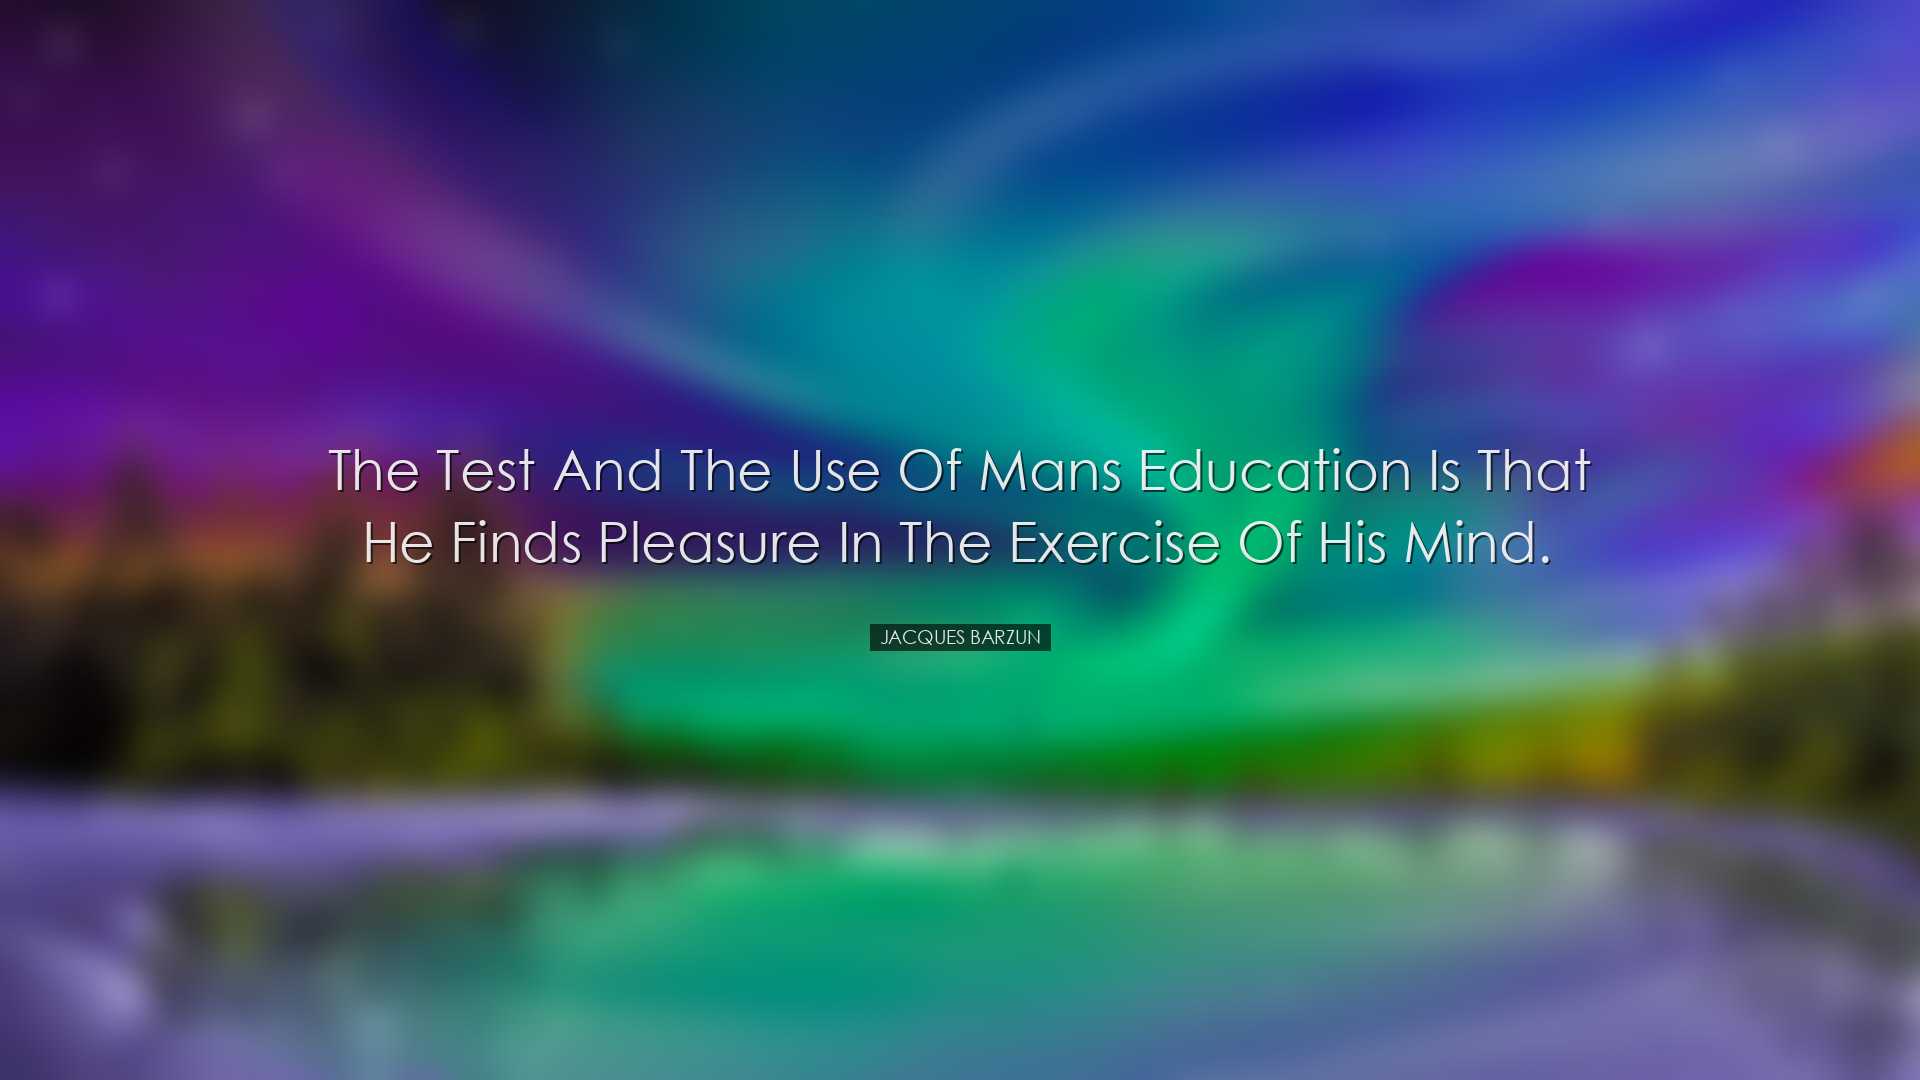 The test and the use of mans education is that he finds pleasure i